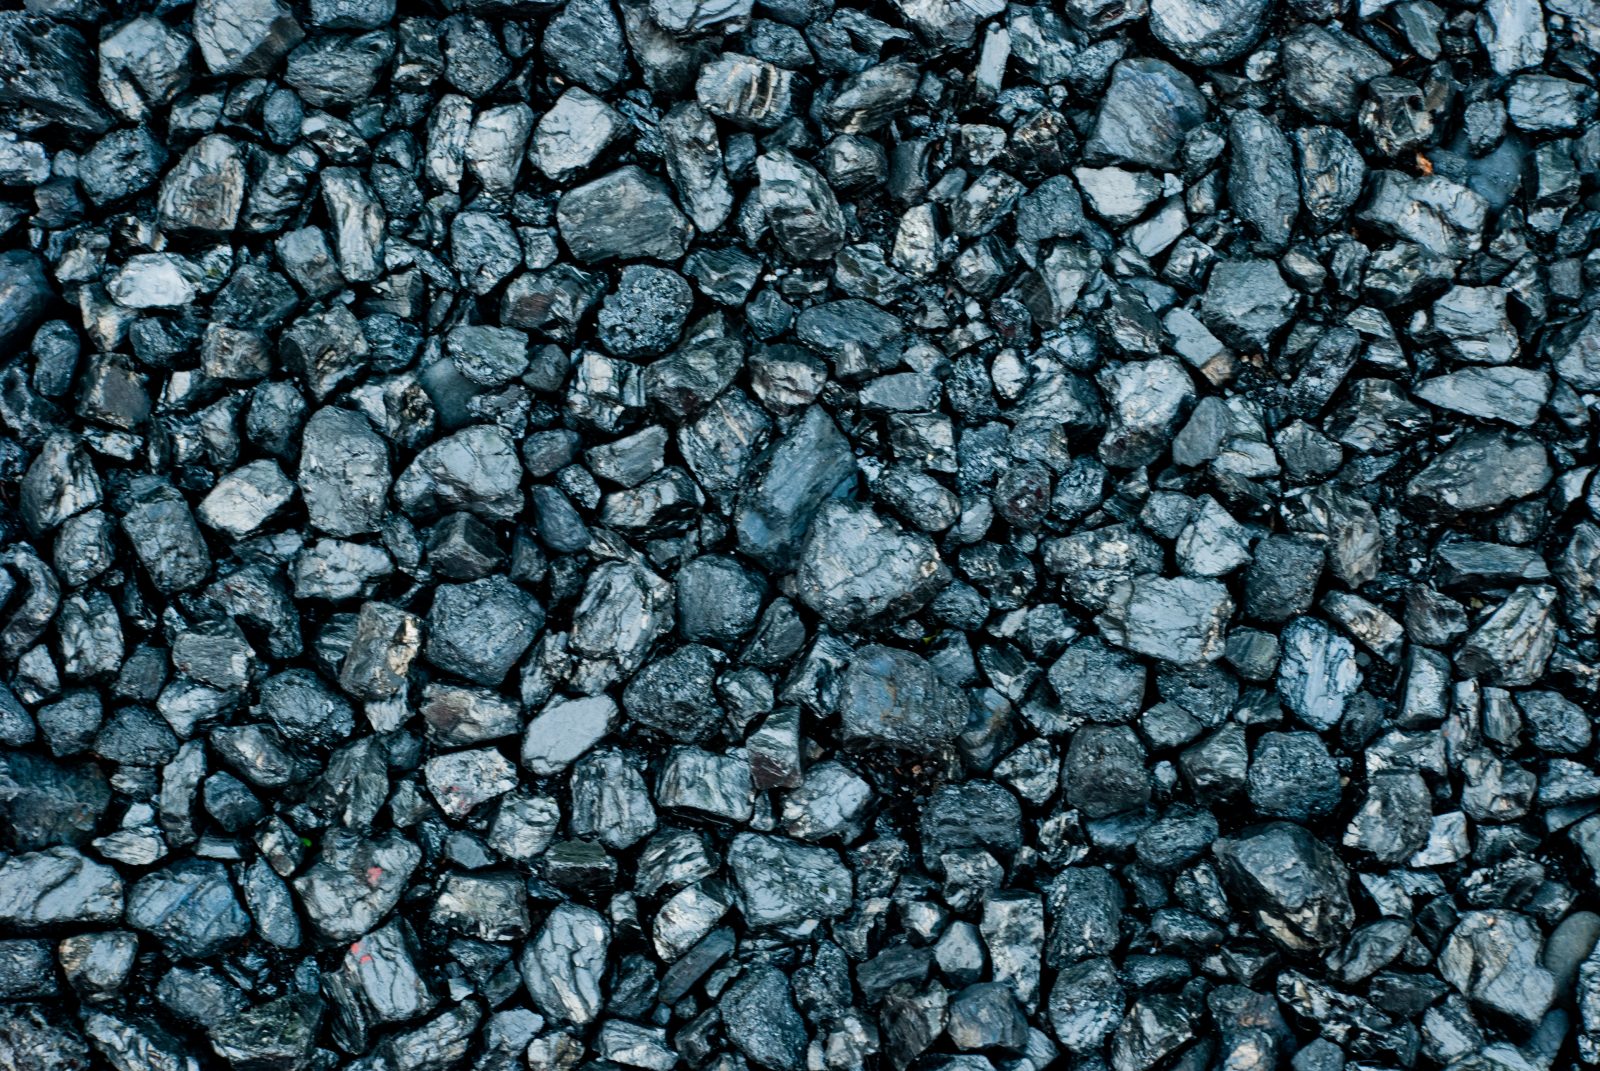 photo of coal by Bartb_pt